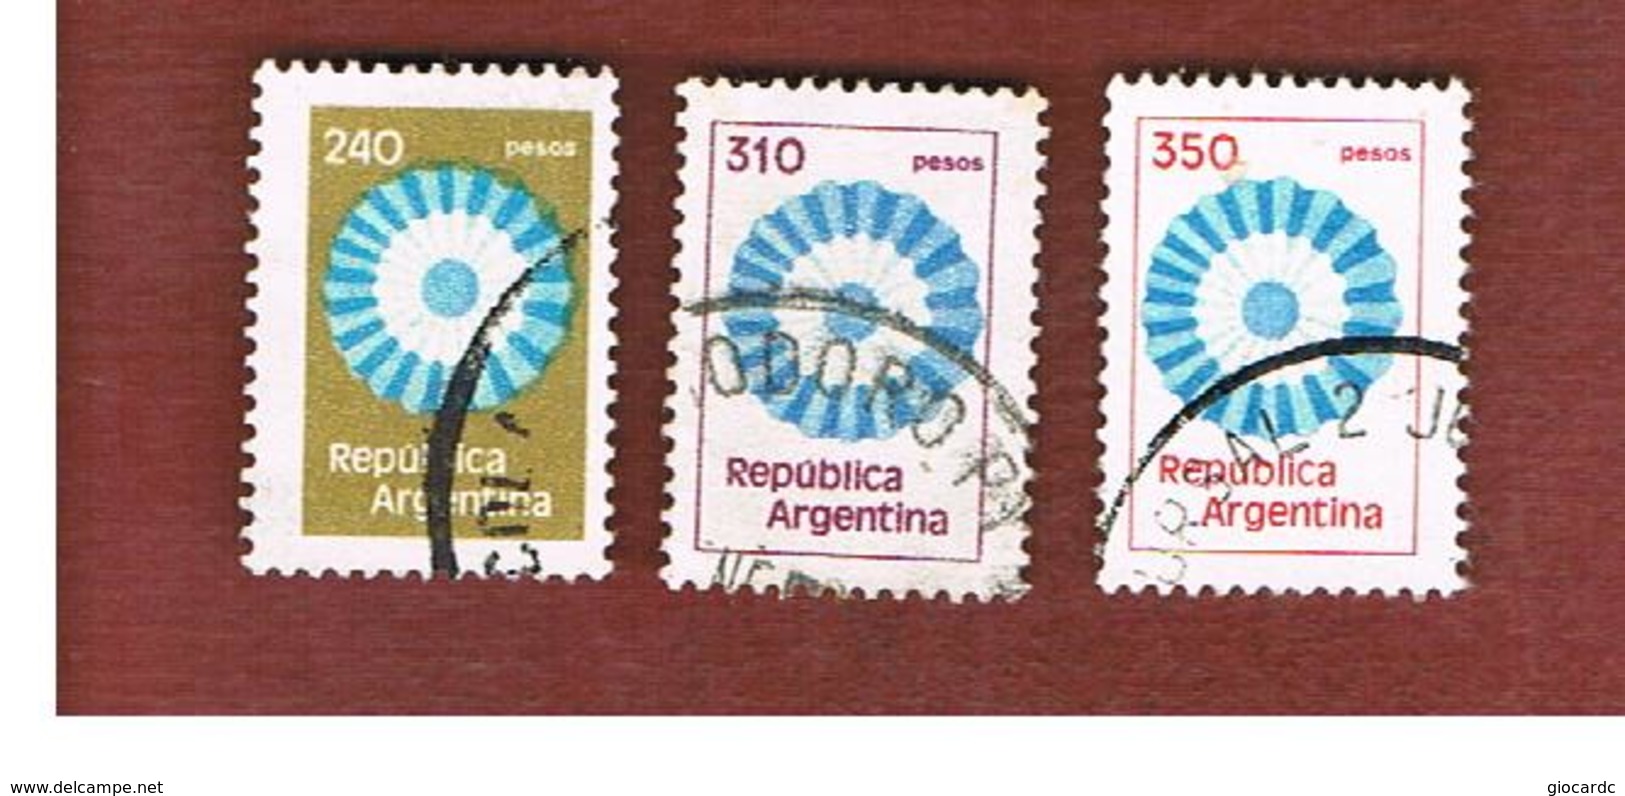 ARGENTINA - SG 1624.1632c  - 1979 ROSETTE (3 STAMPS OF THE CURRENT SERIE)    -   USED ° - Oblitérés